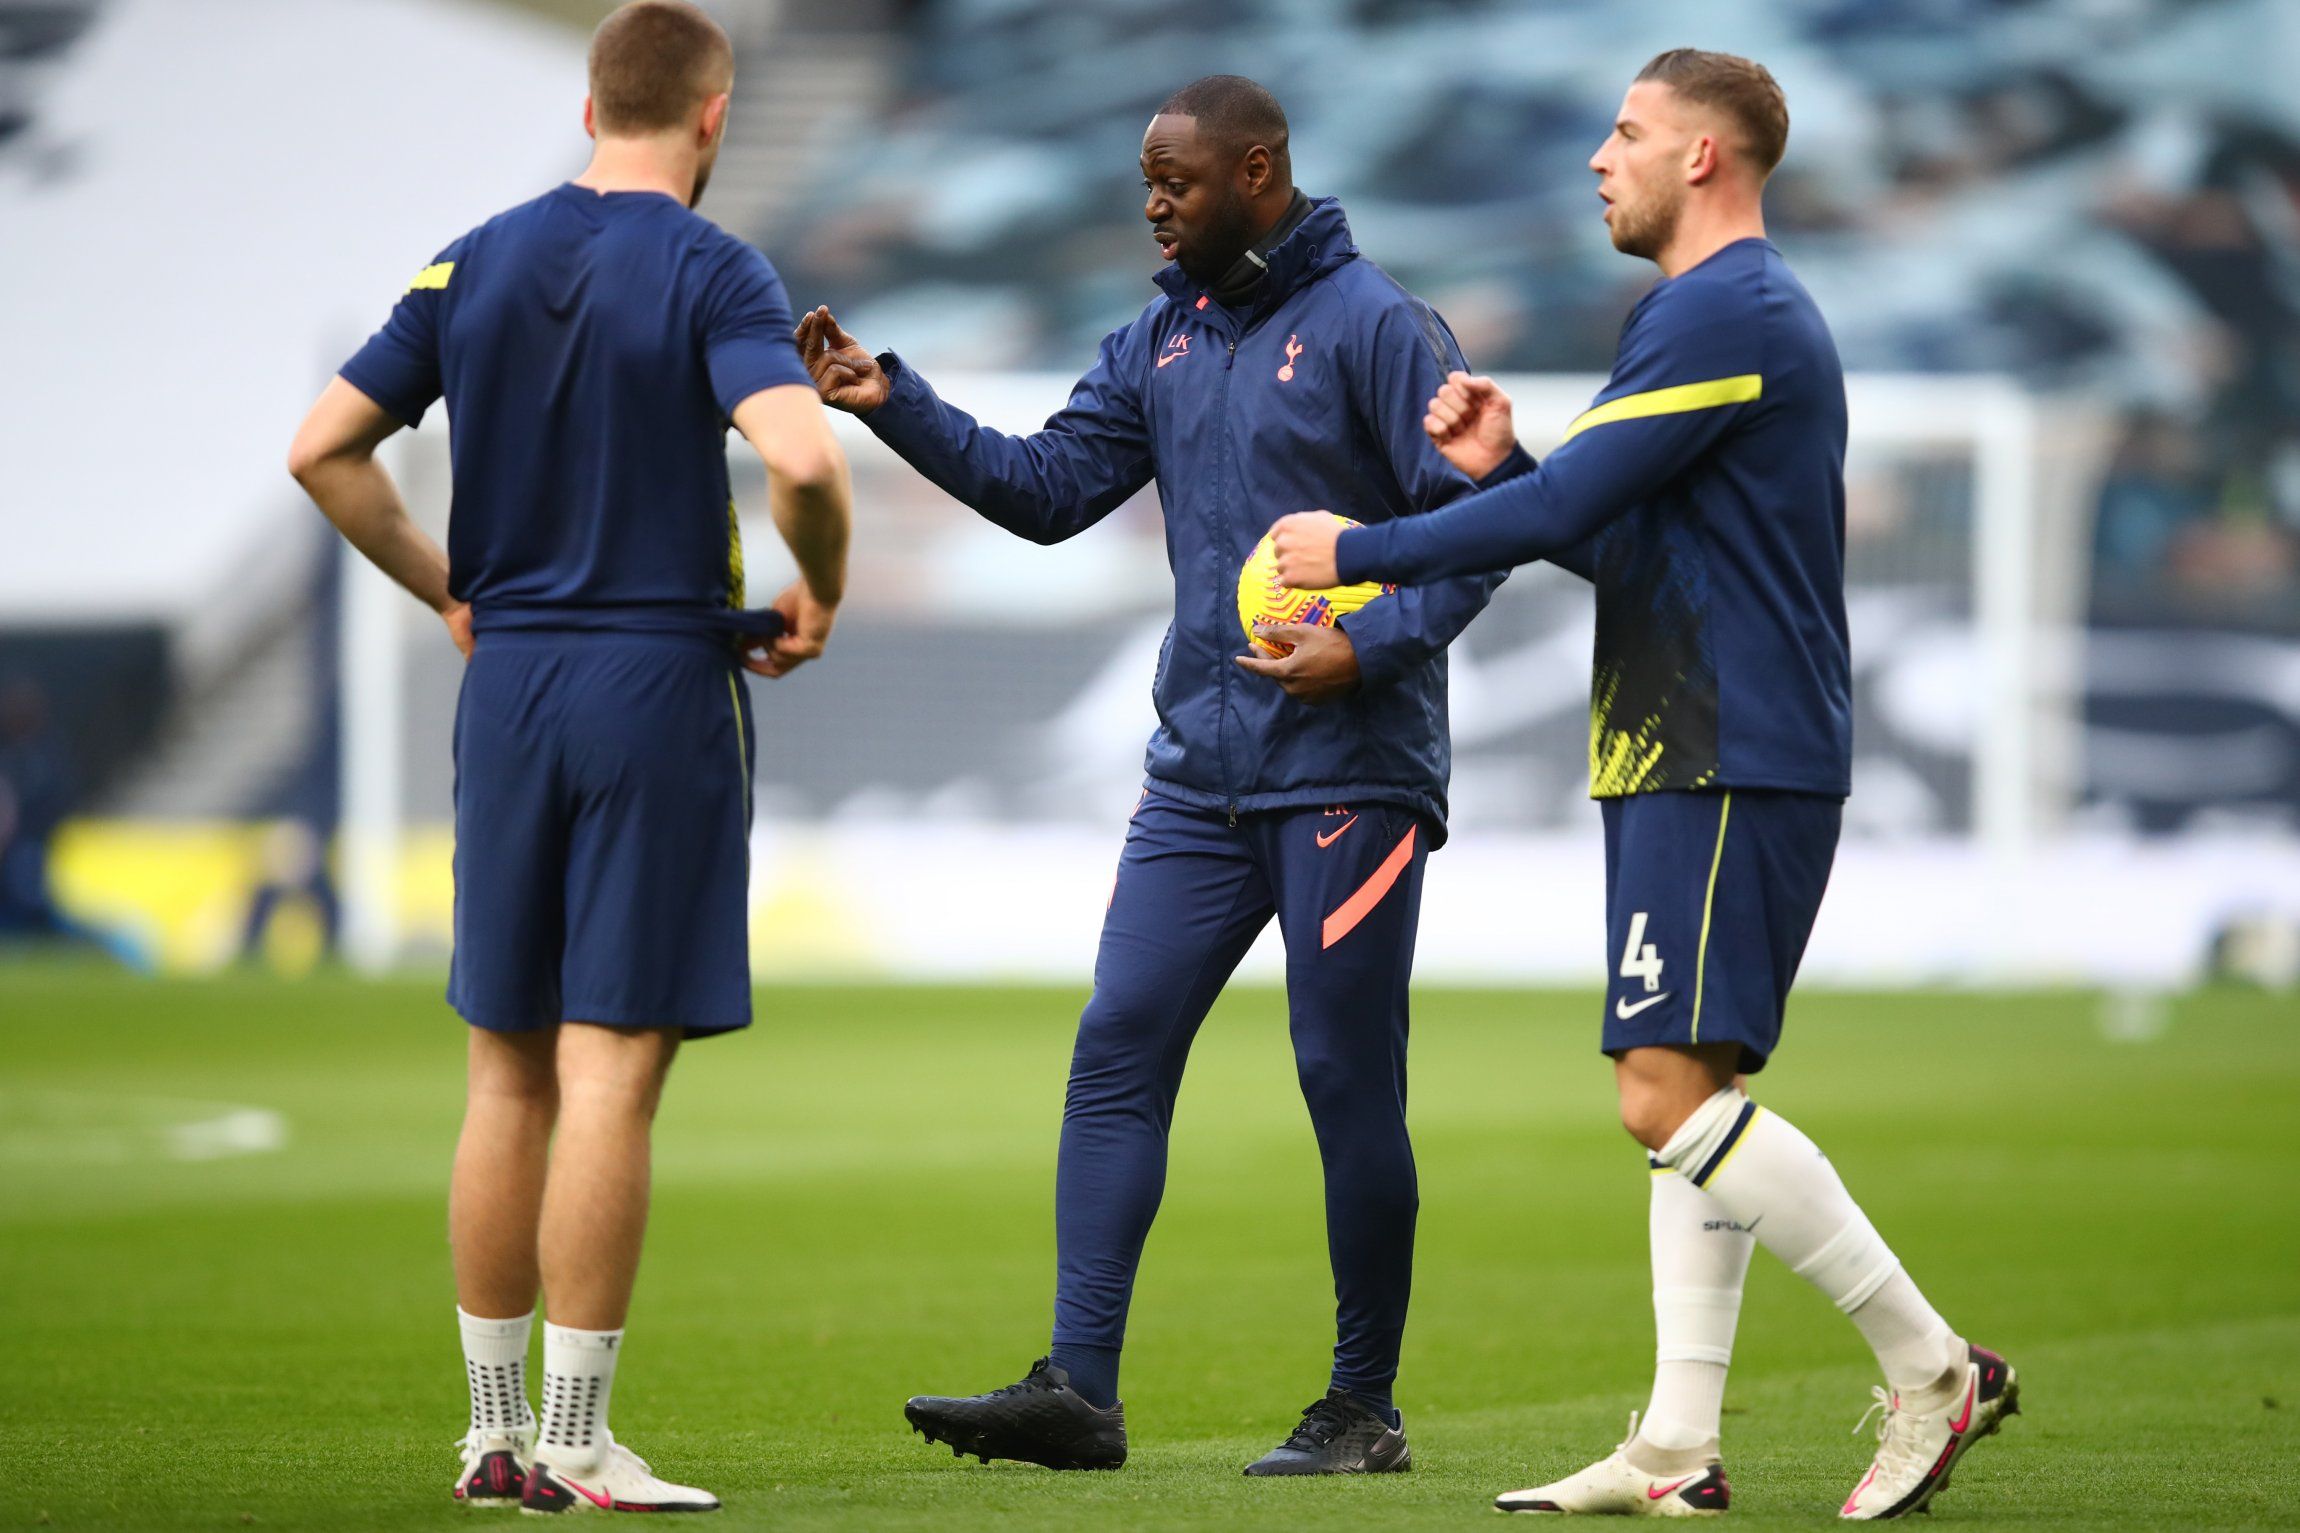 Spurs coach Ledley King with Eric Dier and Toby Alderweireld